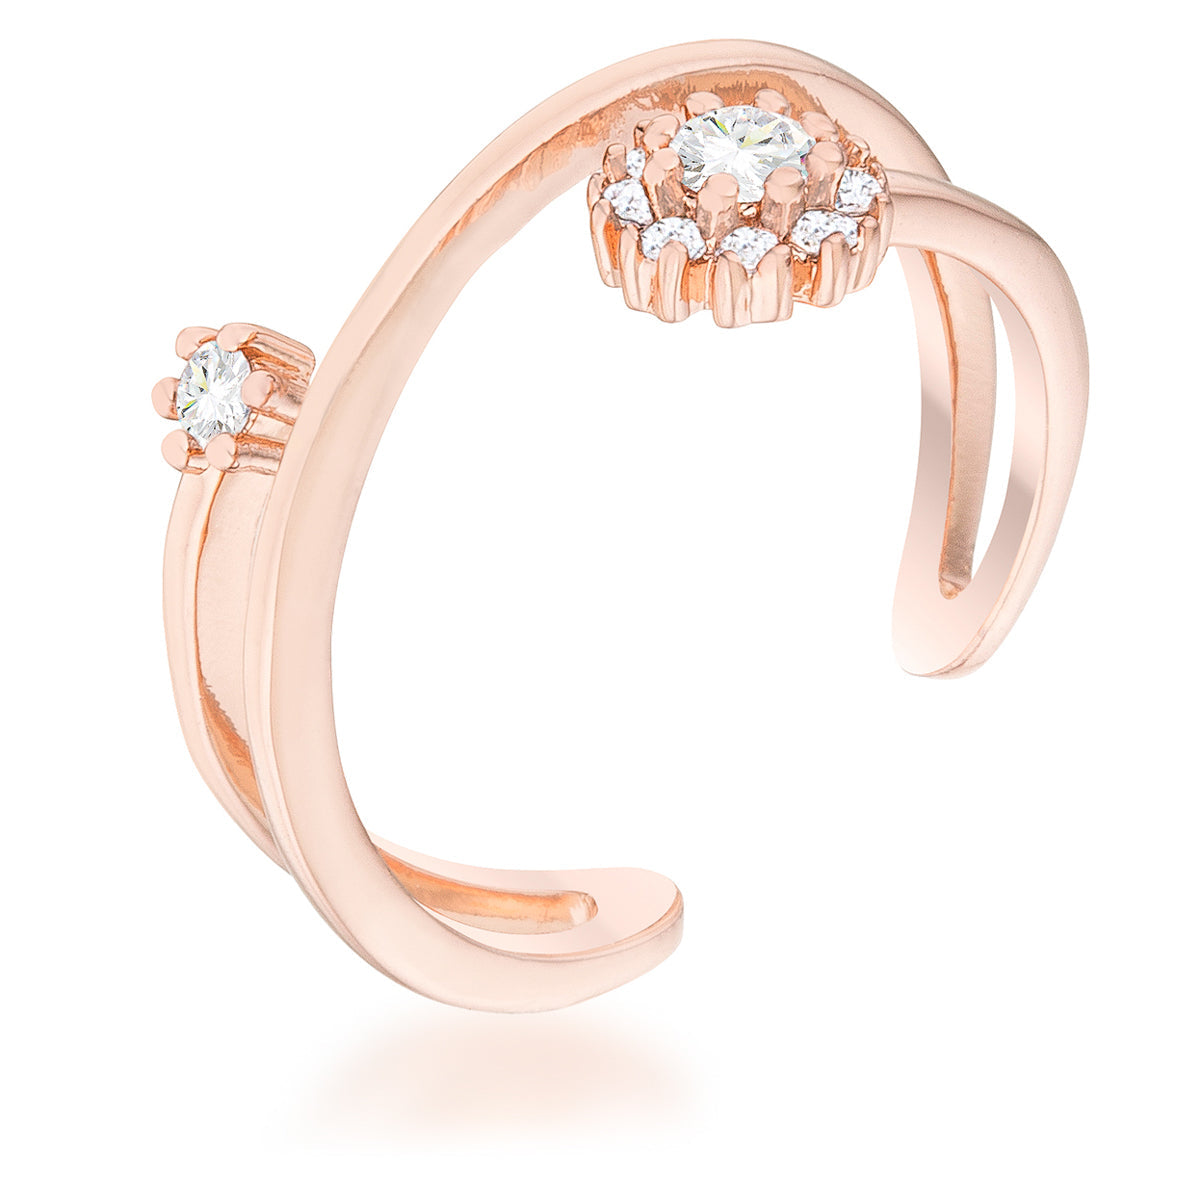 Artiste Clear Crystal Rose Gold Tone Scarf Ring